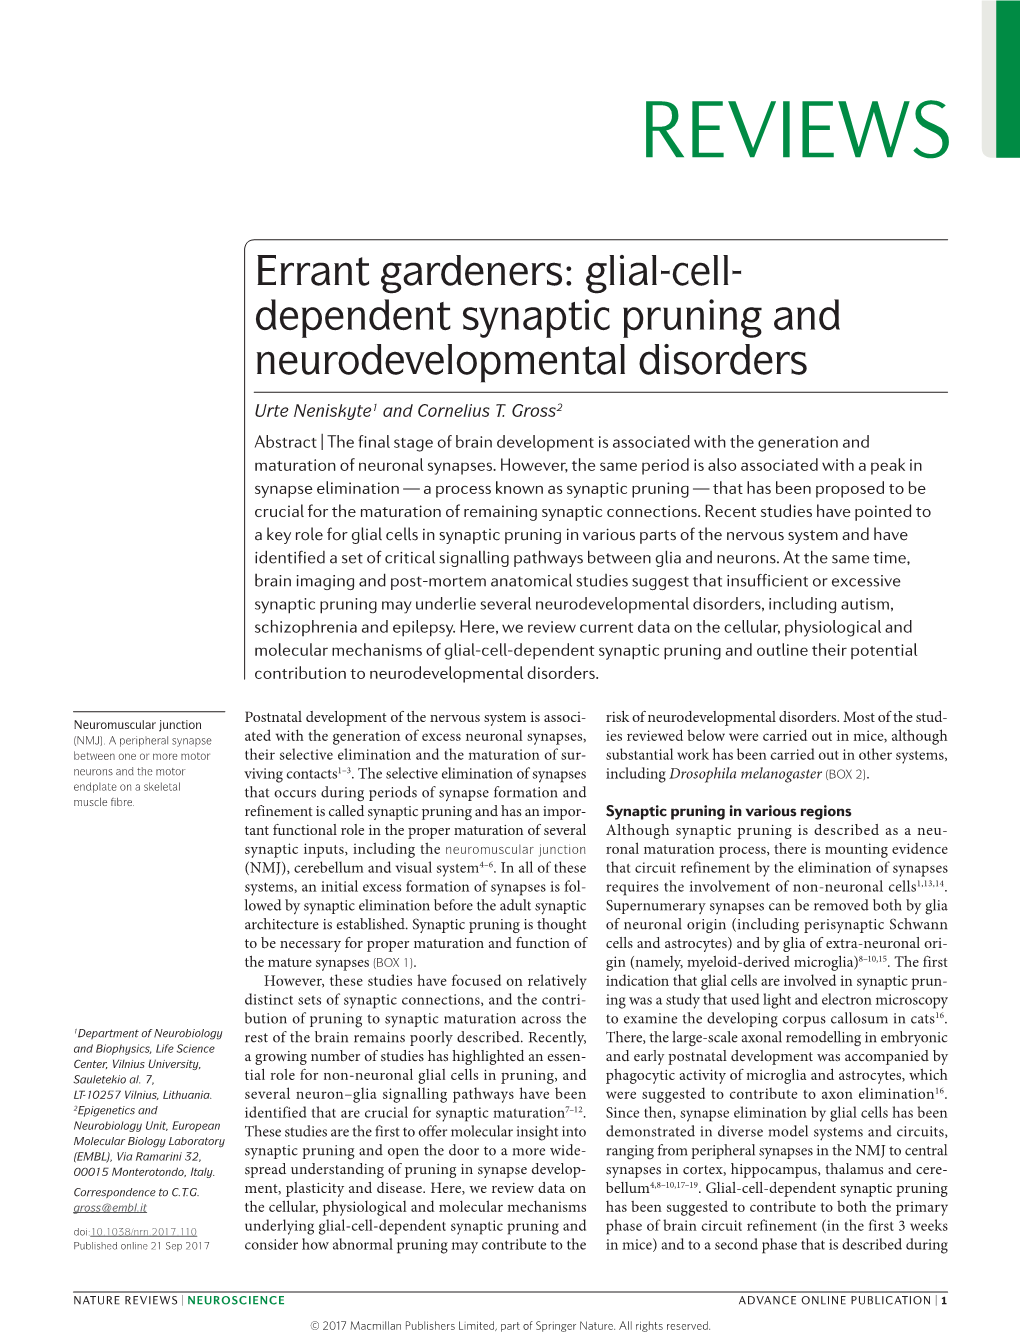 Glial-Cell-Dependent Synaptic Pruning and Neurodevelopmental Disorders